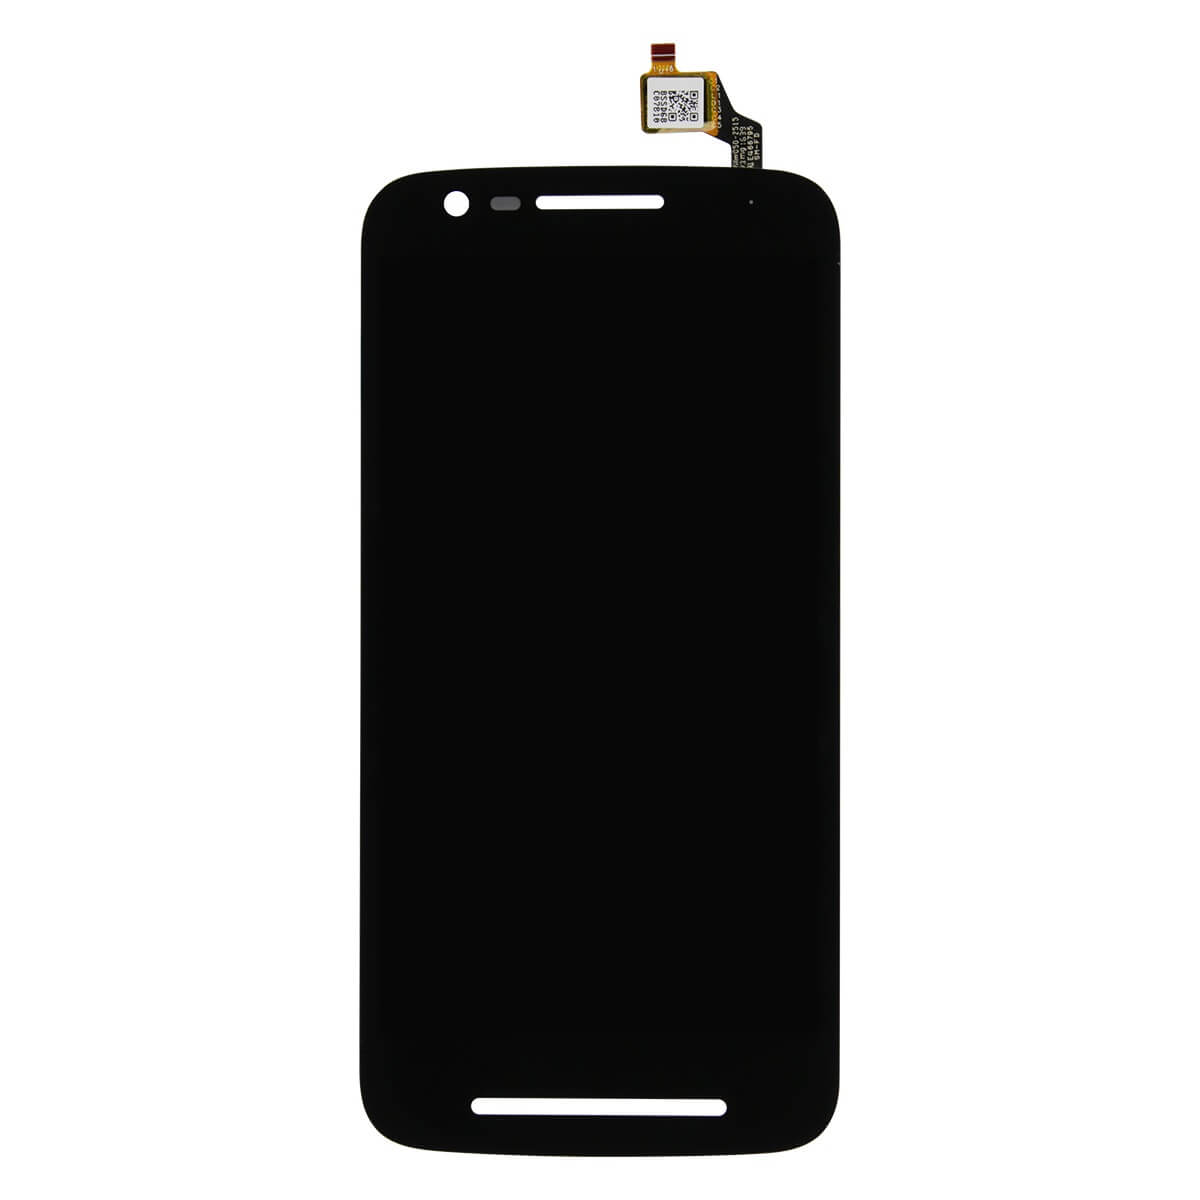 Motorola Moto E3 Display and Touch Screen Replacement